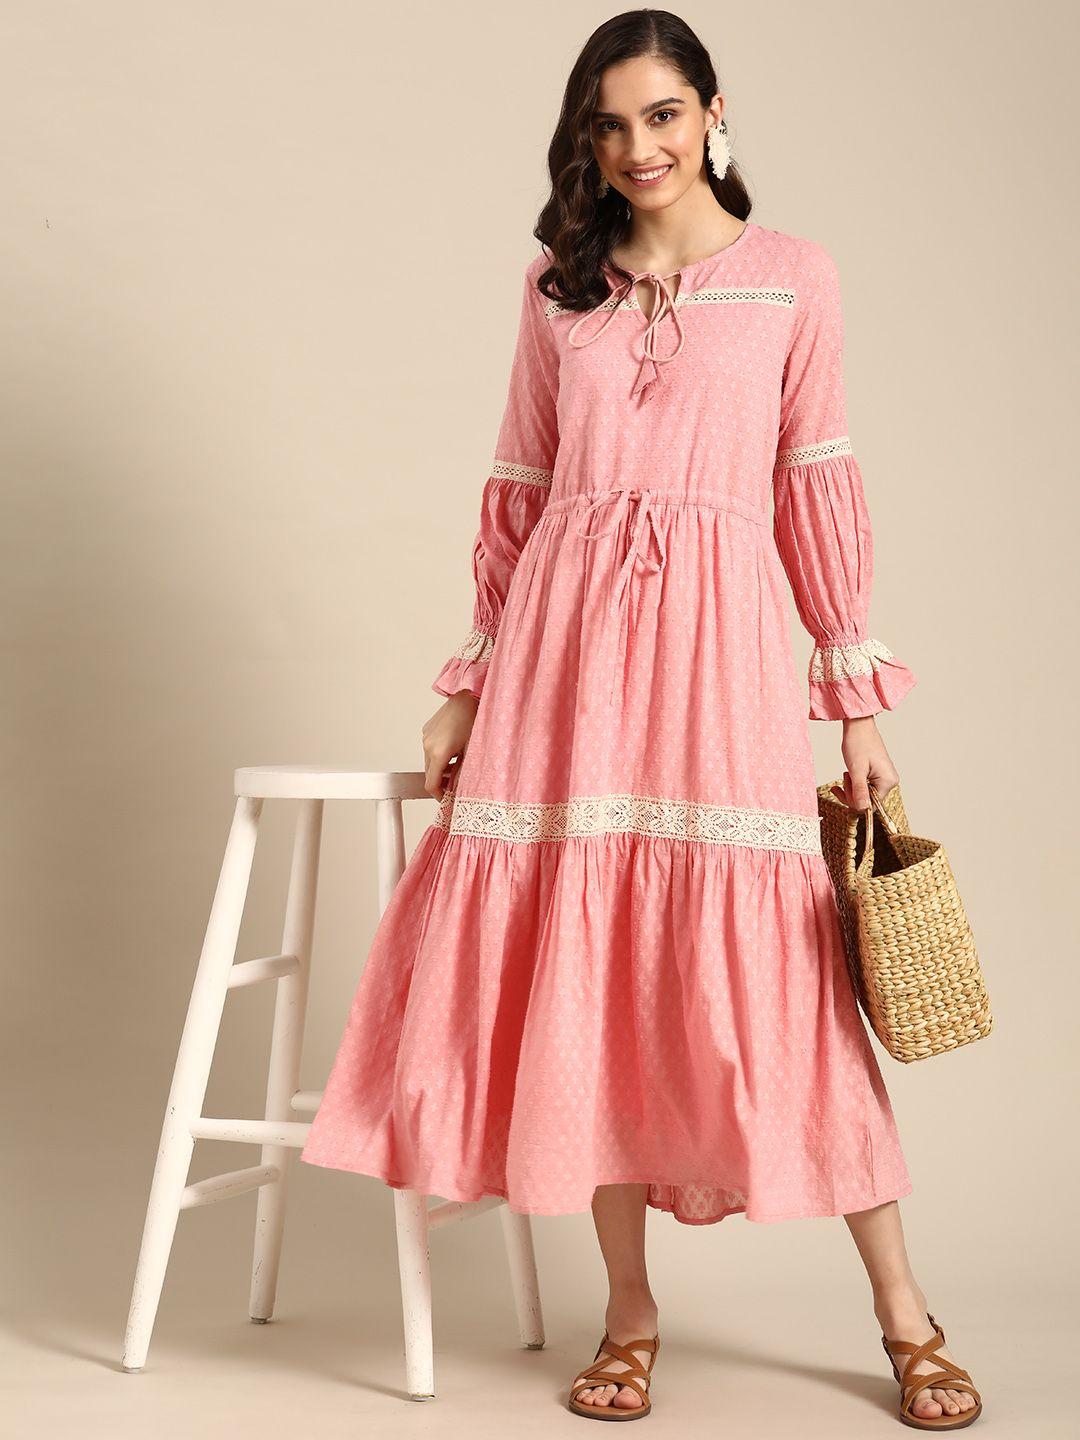 sangria pink & off-white ethnic dobby weave lace inserts midi cotton fit & flare dress